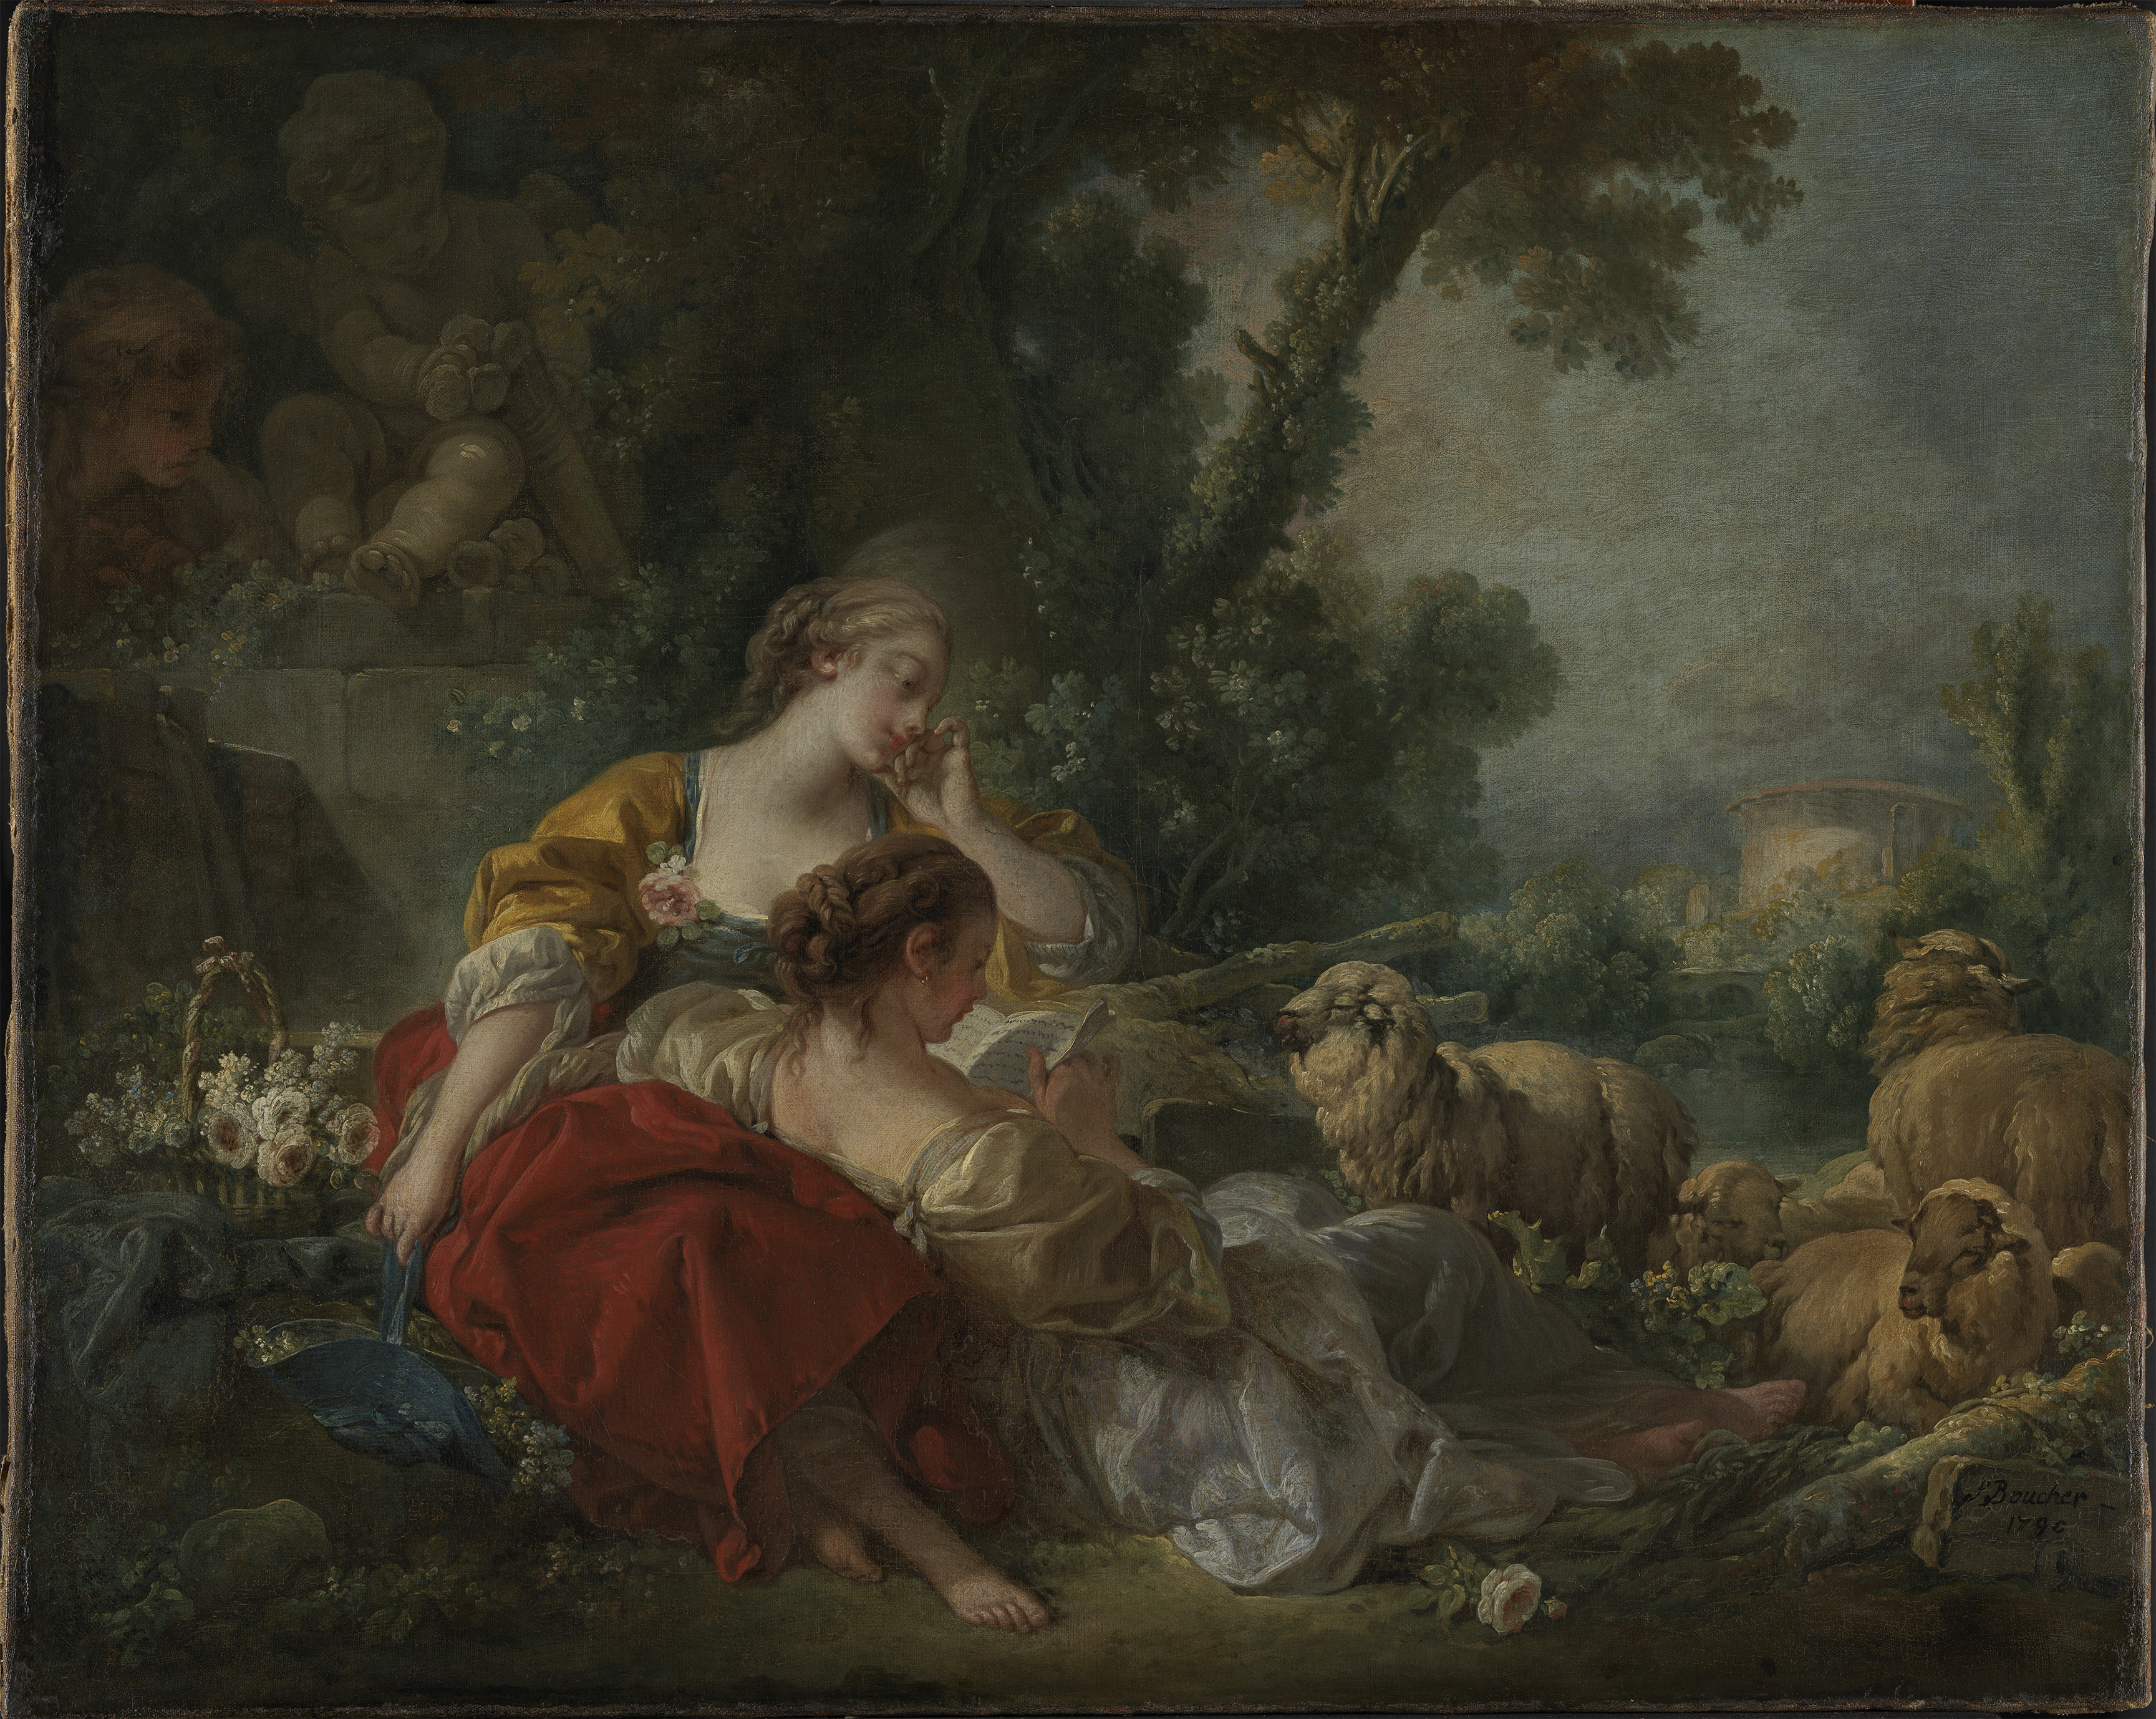 Painting by François Boucher showing two seated shepherdesses with sheep in nature in a rococo scene